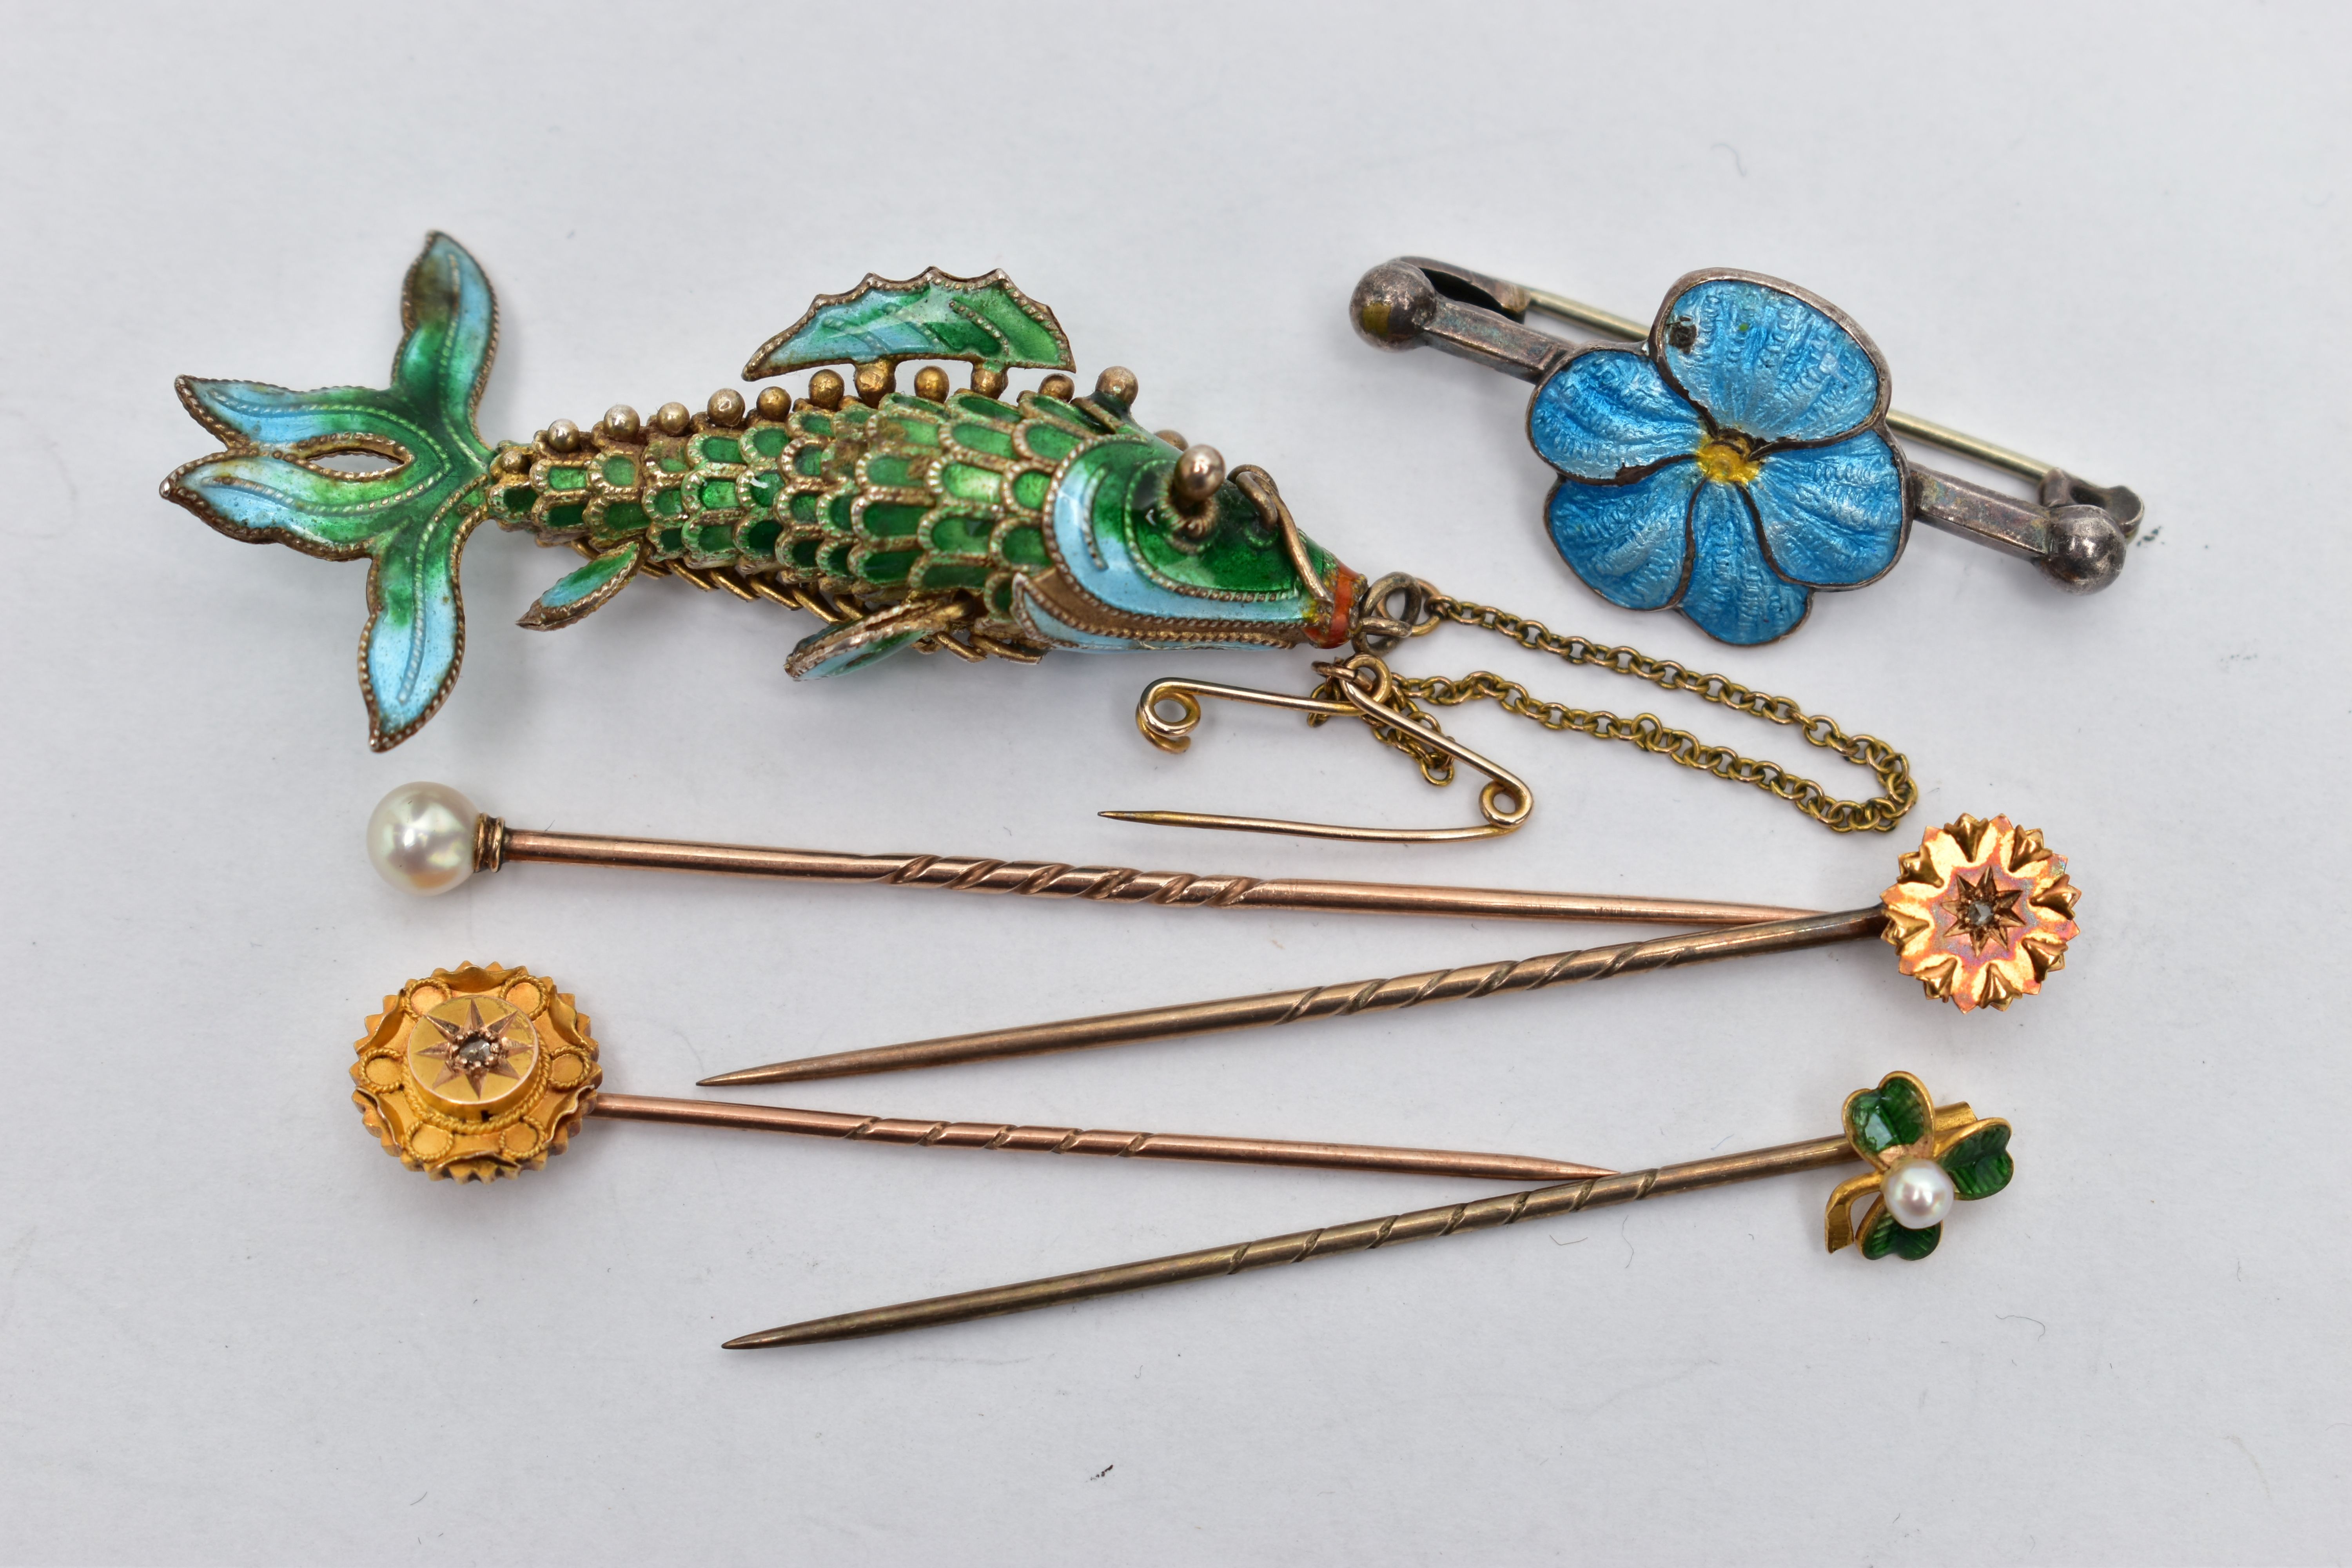 SIX ITEMS OF JEWELLERY, to include an articulated enamel fish, a blue enamel flower bar brooch, a